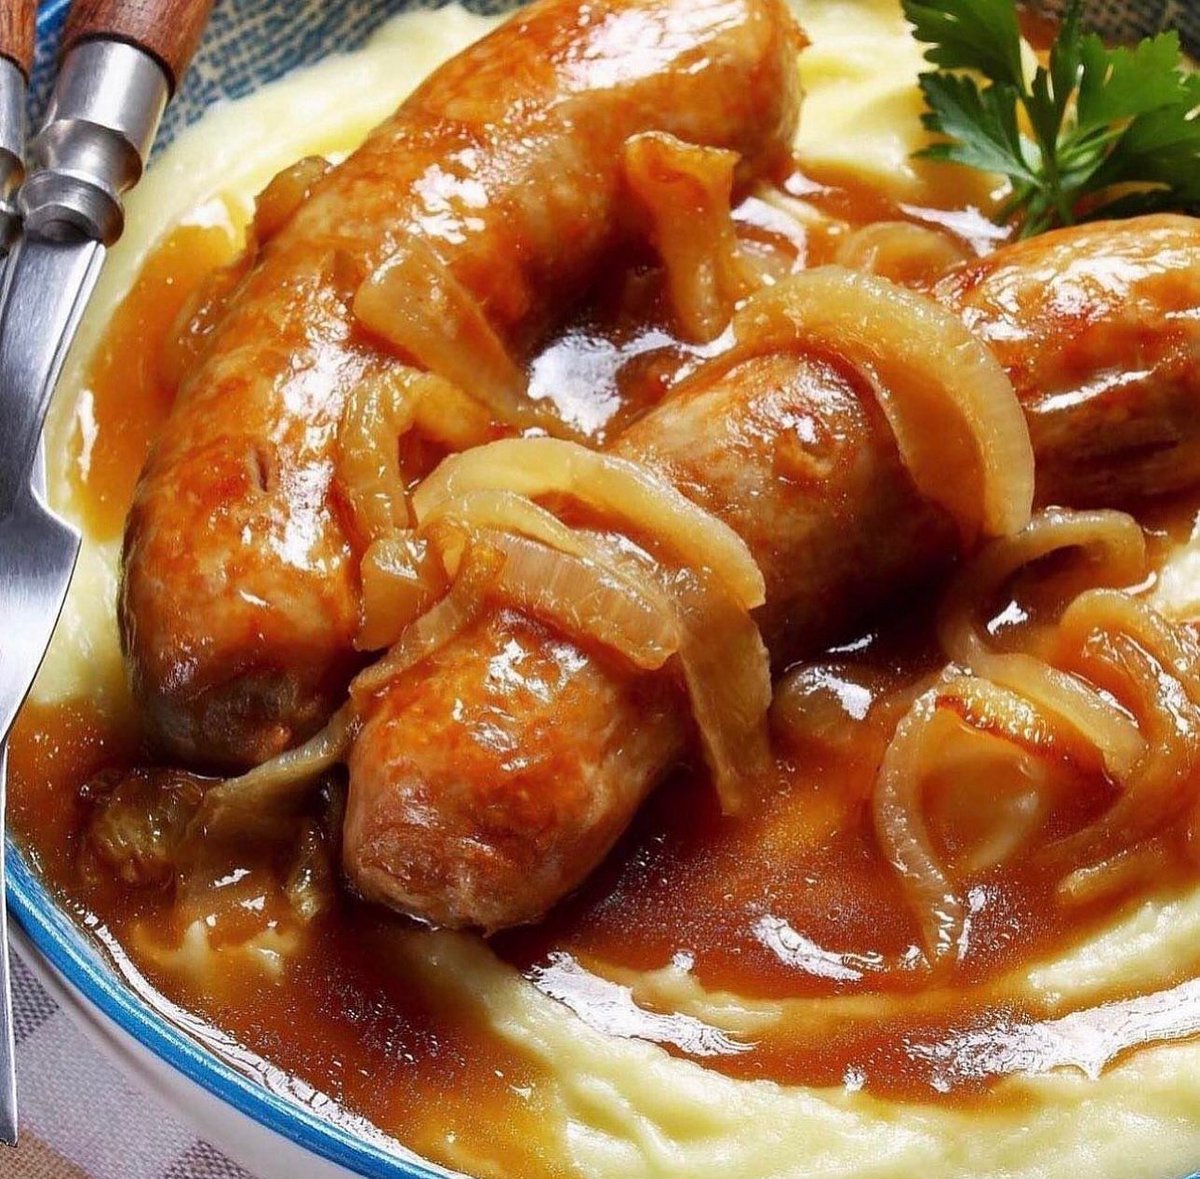 Treat yourself to a mid-week lunch in T.P. Smith’s - Bangers & Mash, Cumberland sausages served with creamy mash, topped with onion gravy 👌

#tpsmiths #tpsmithsbarandrestaurant #bangersandmash #deliciousfood